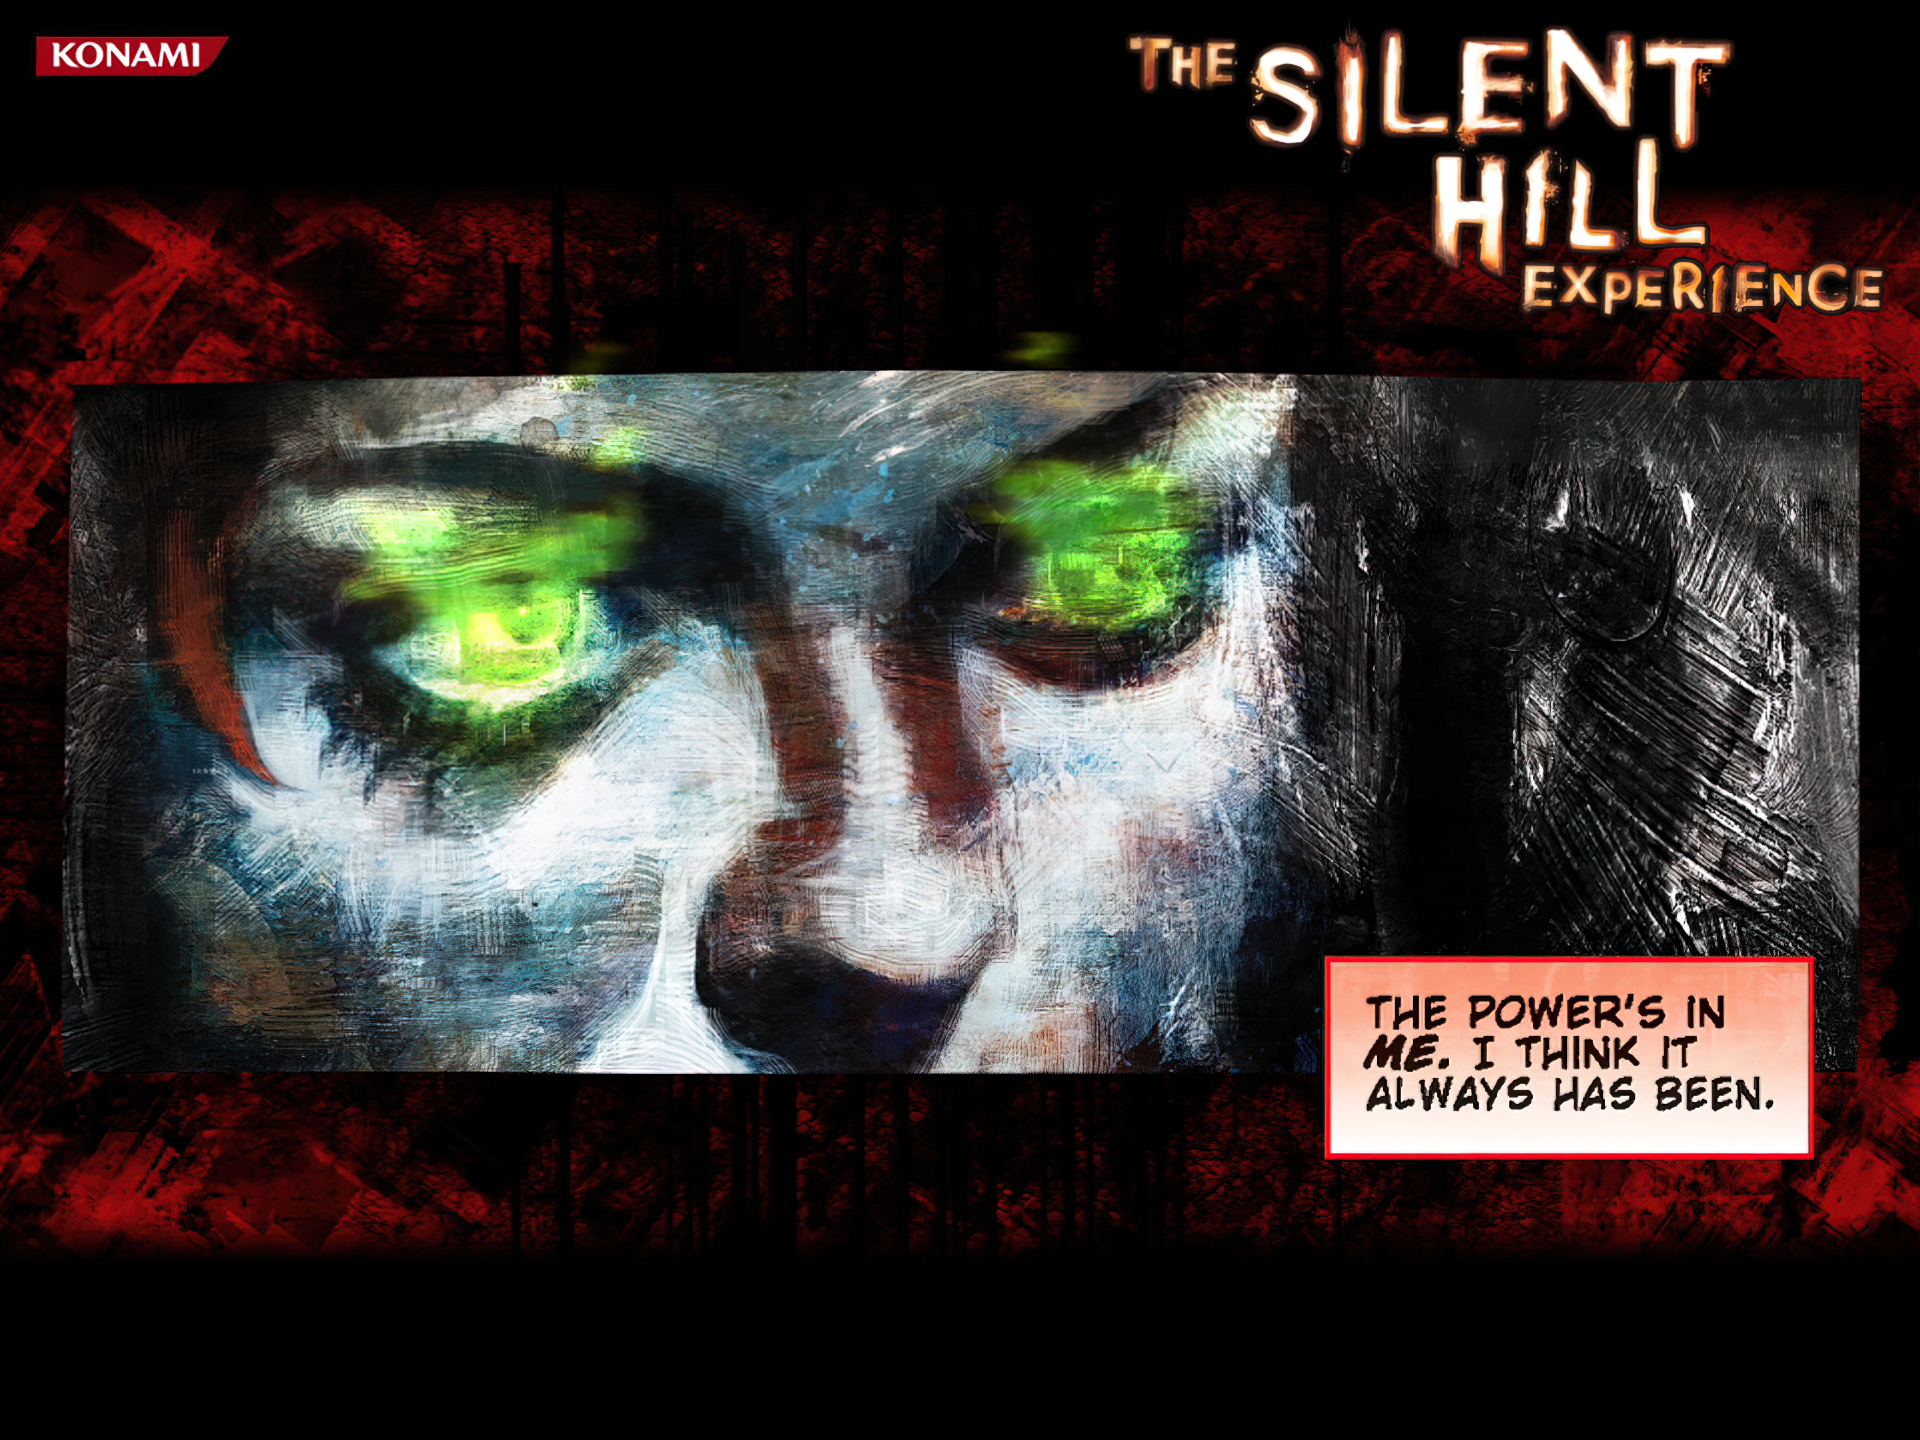 The Silent Hill Experience desktop wallpaper featuring video game Silent Hill.